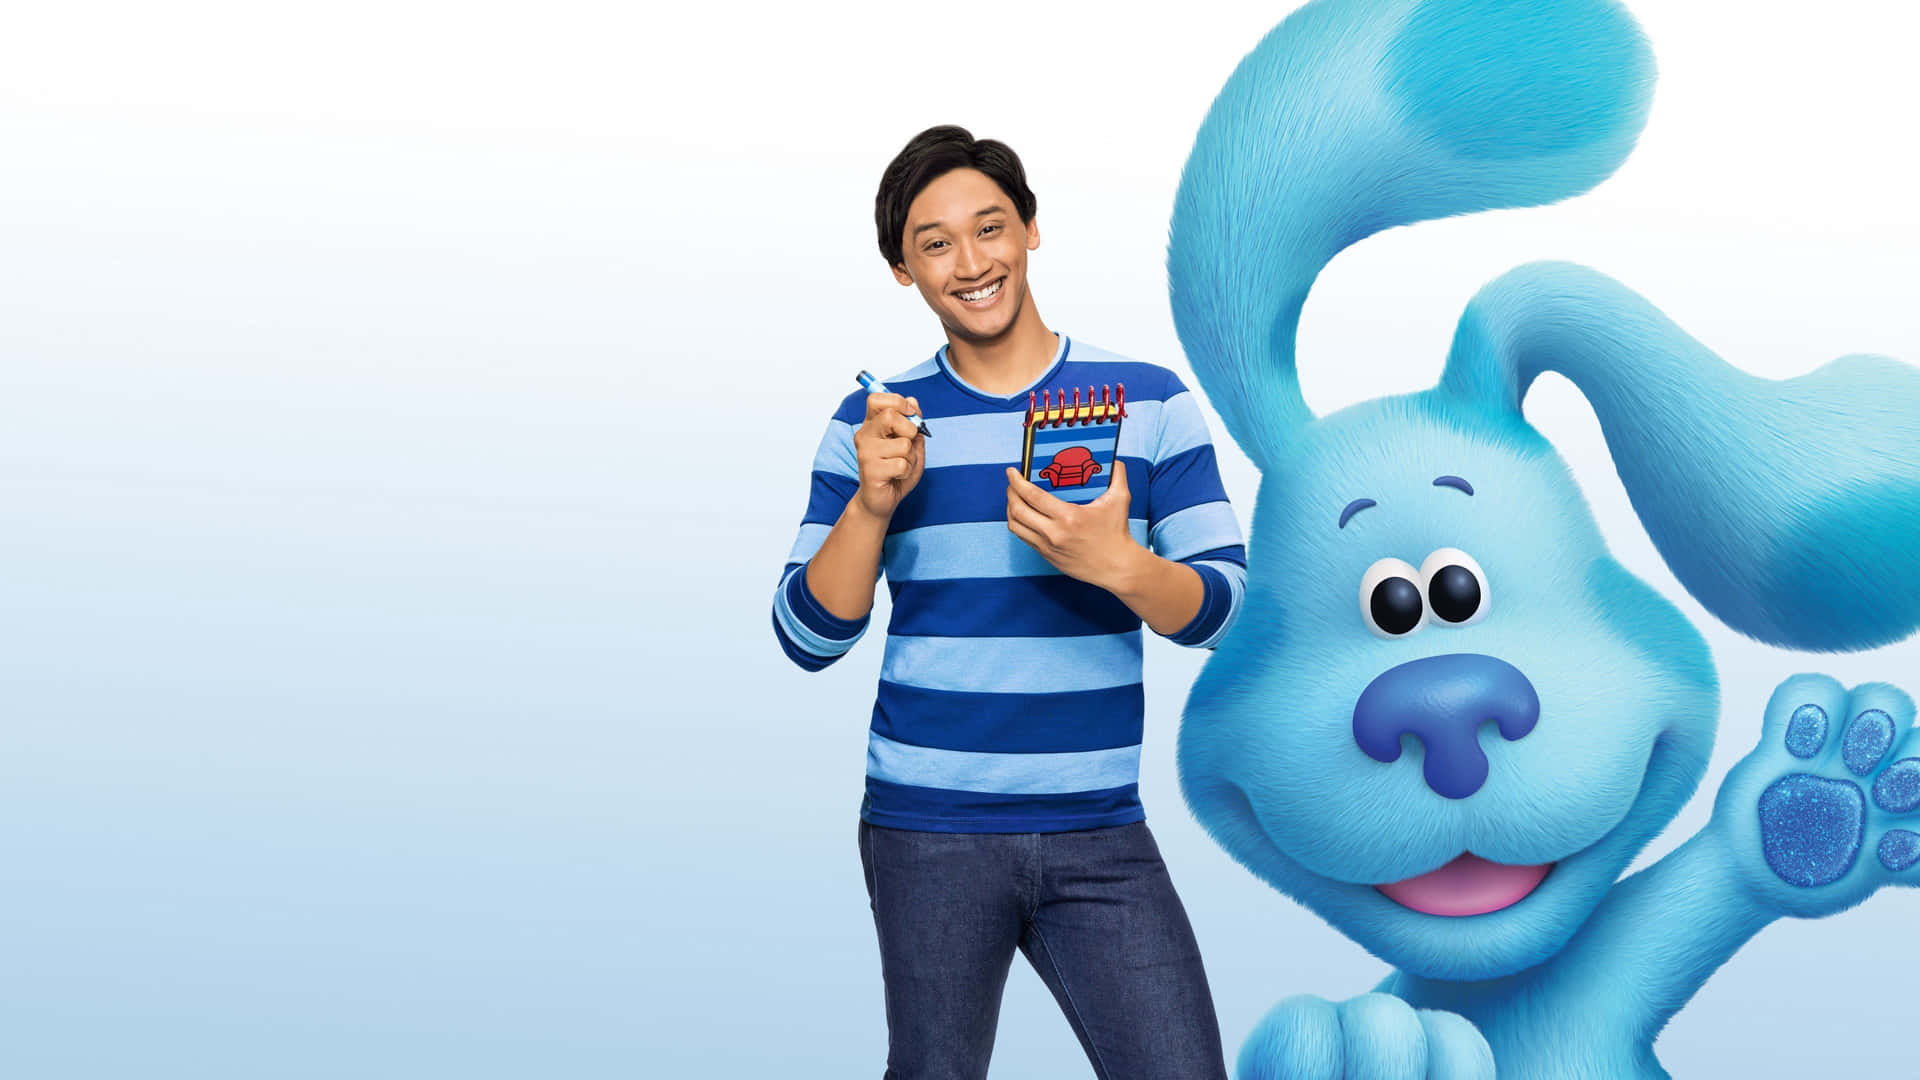 Come and join the fun in Blue's Clues!